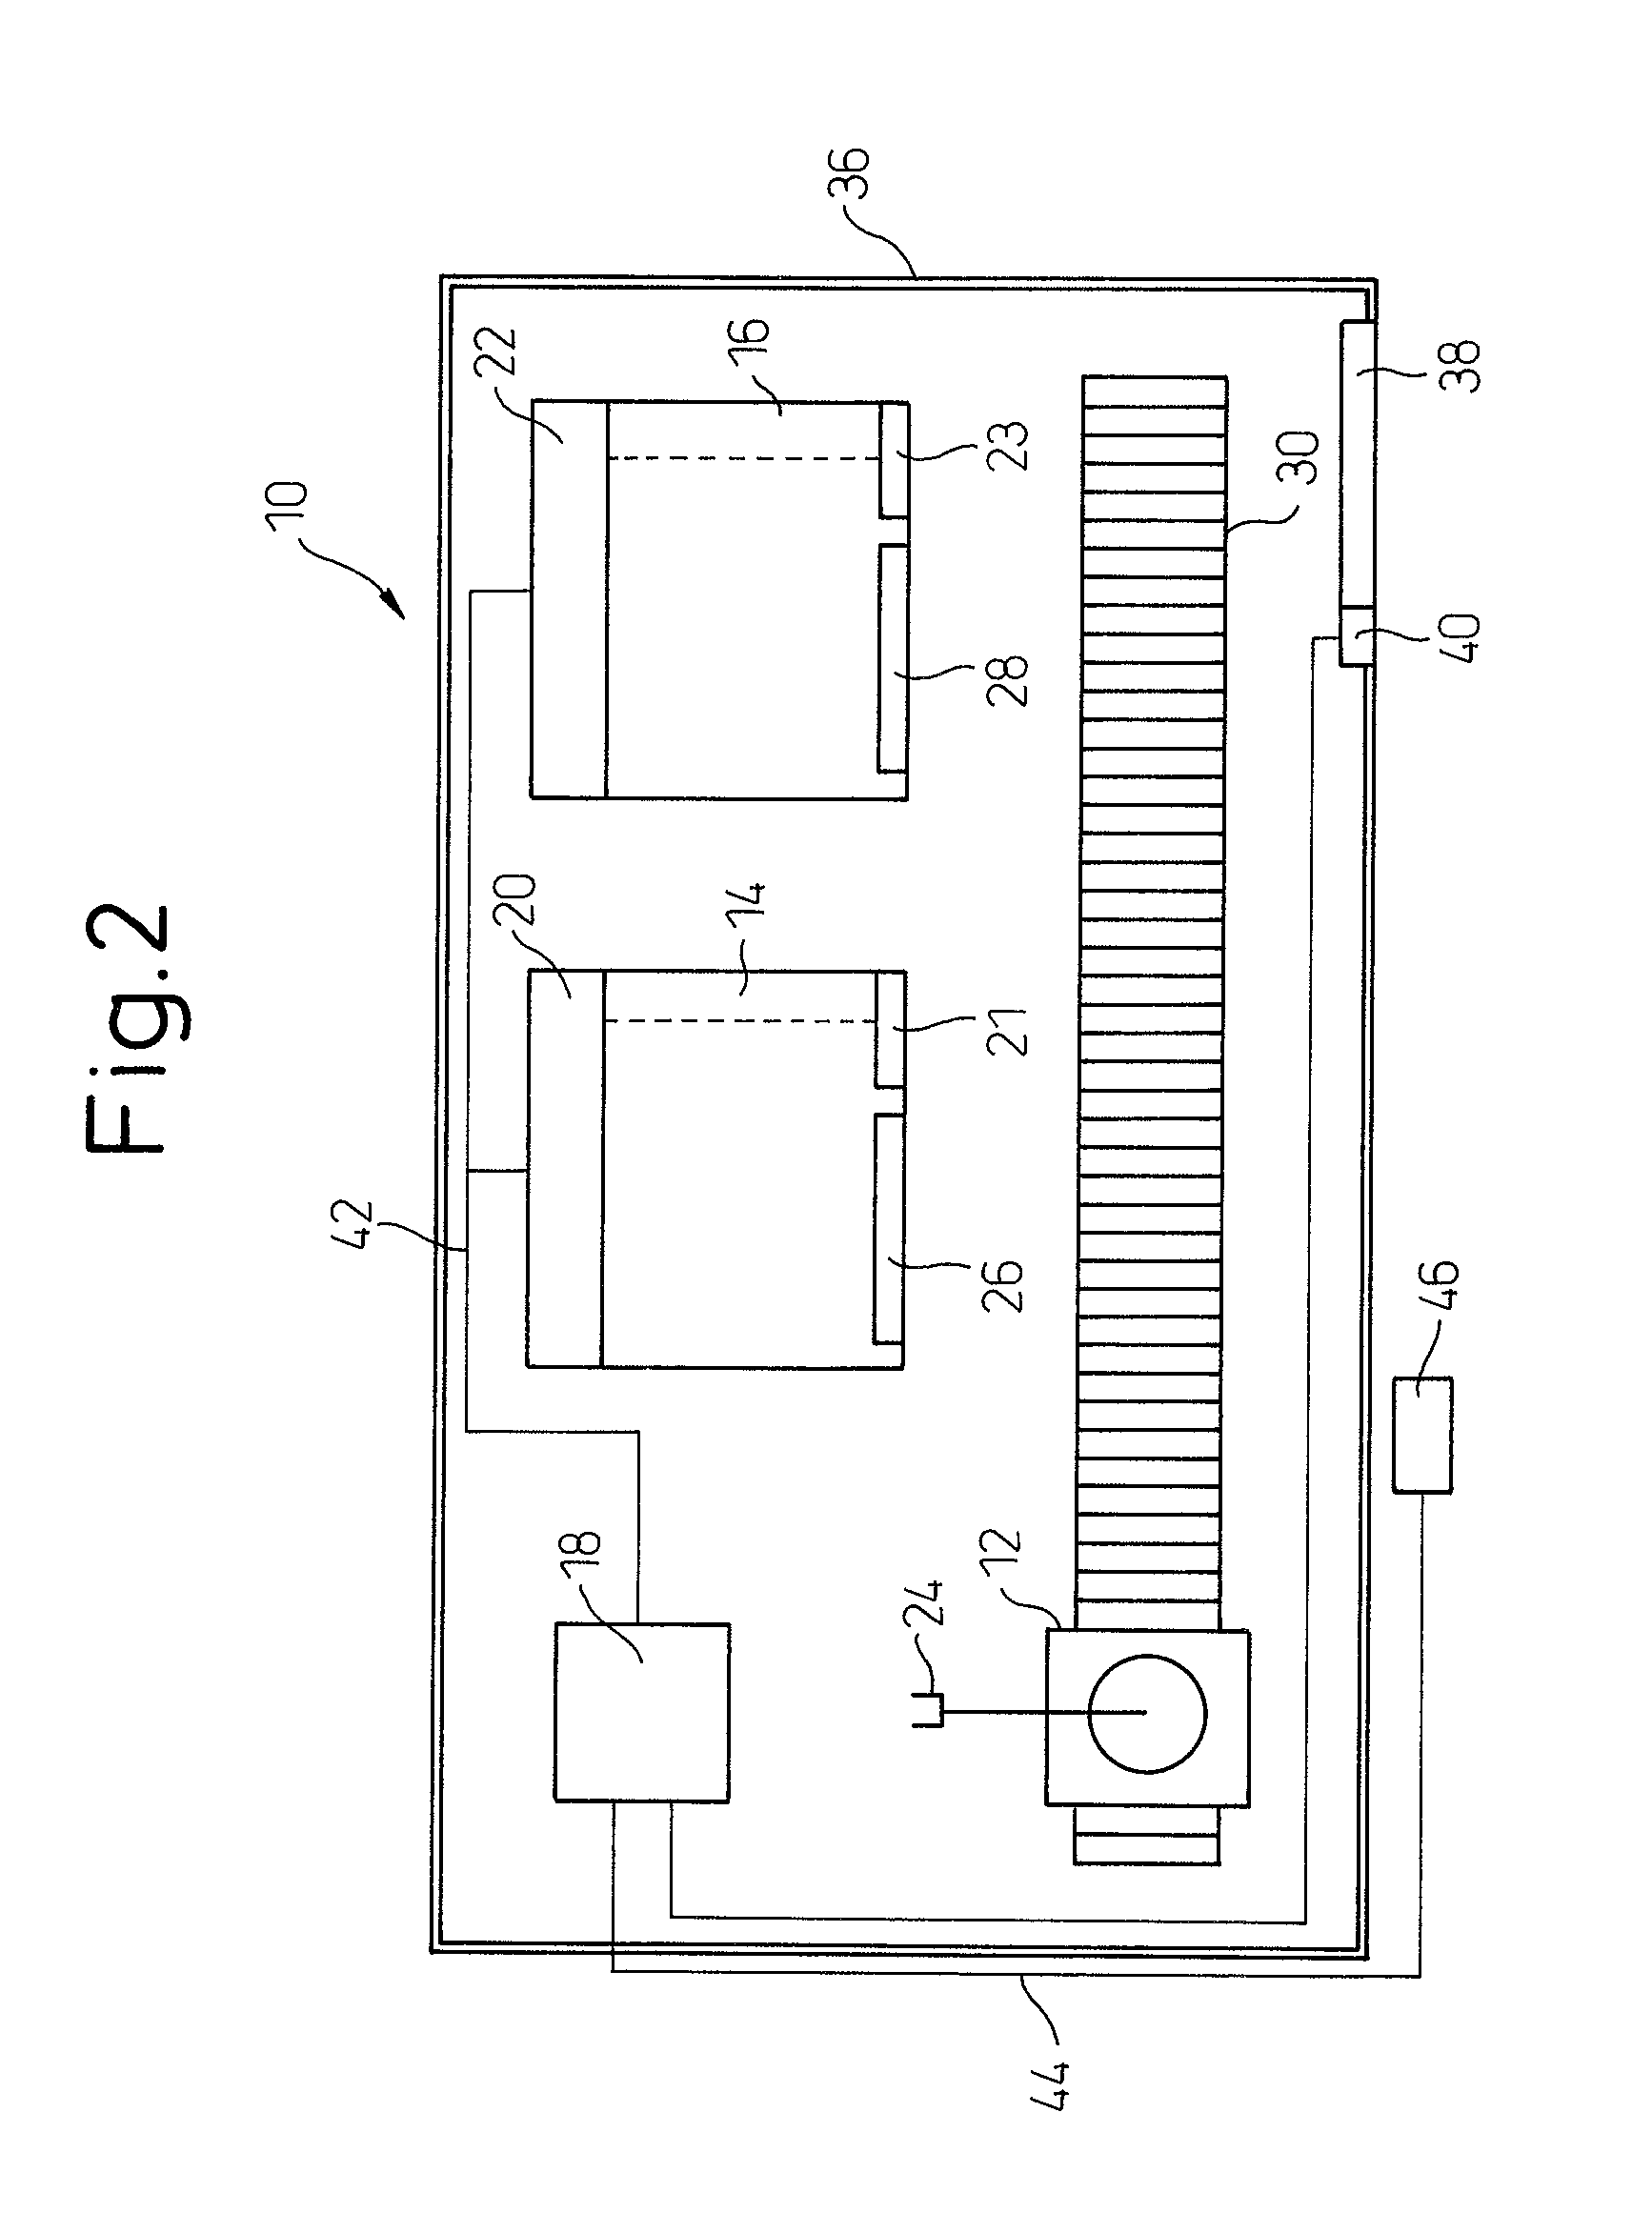 Robot control system provided in machining system including robot and machine tool